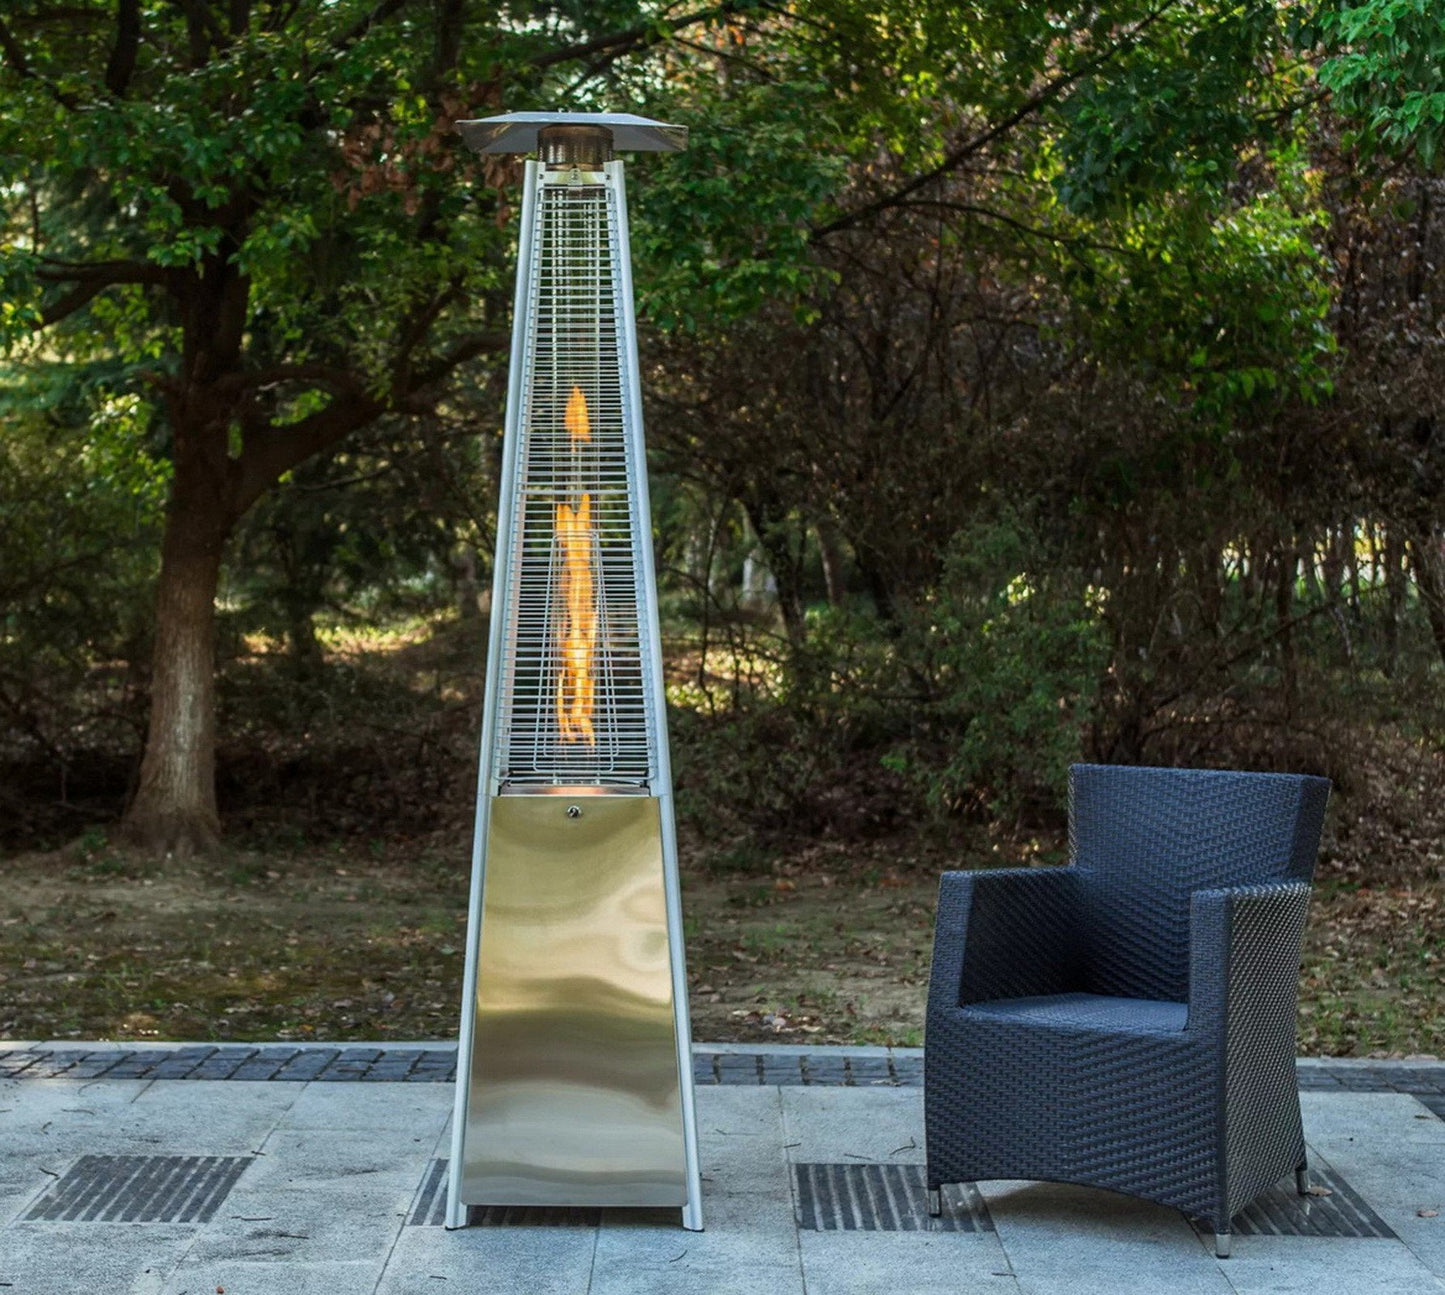 Stainless Steel 7' Pyramid Flame Outdoor Patio Heater Propane 42,000 BTU